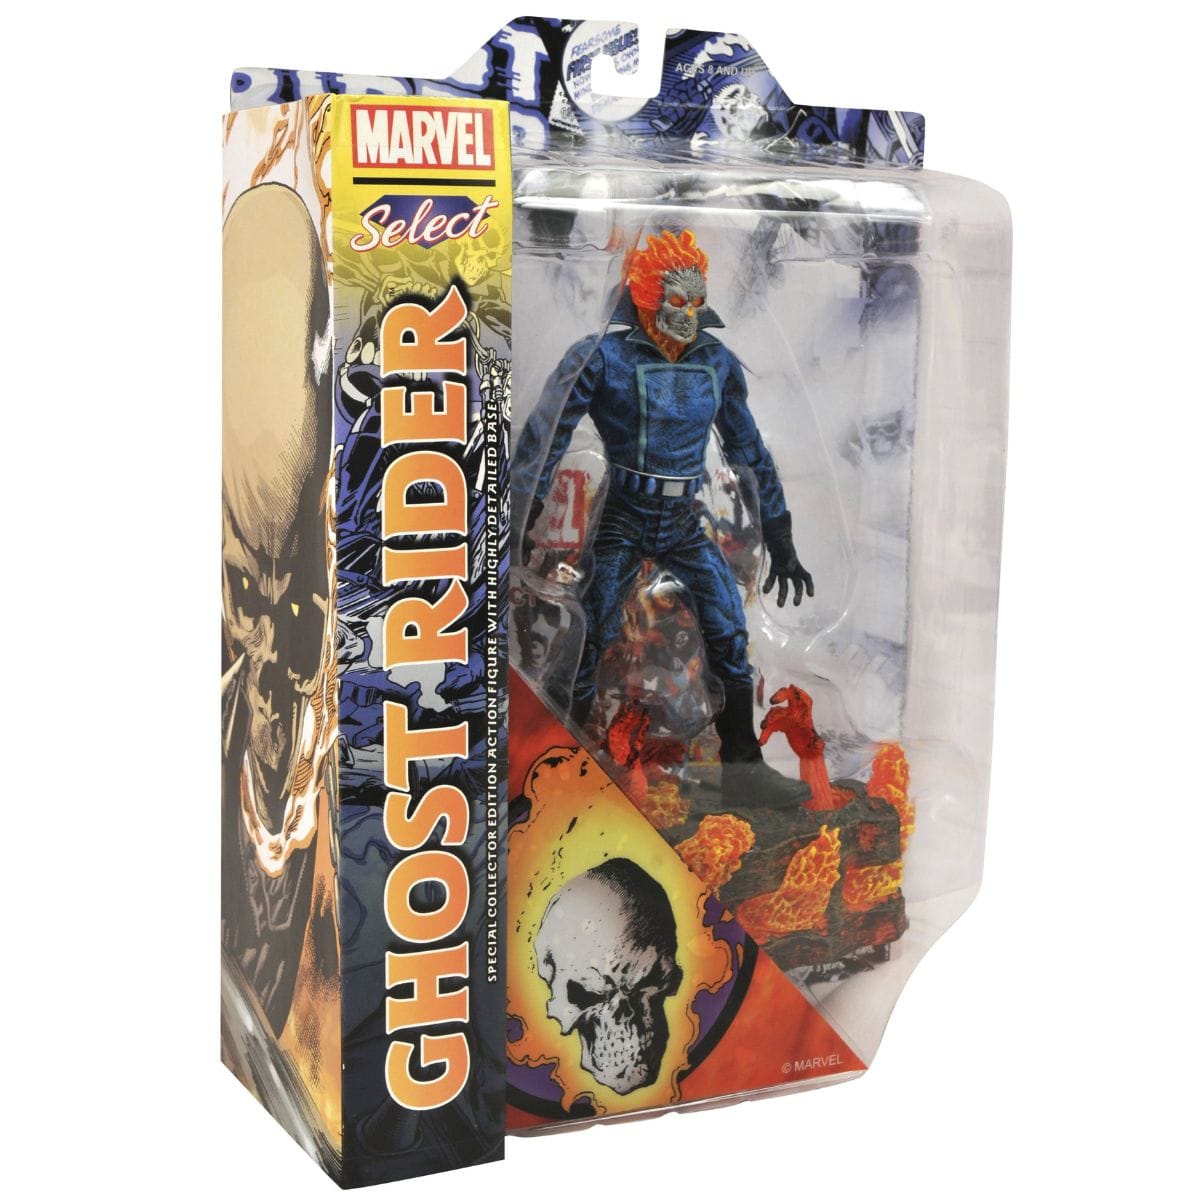 Diamond Select Toys Marvel Select Ghost Rider Action Figure